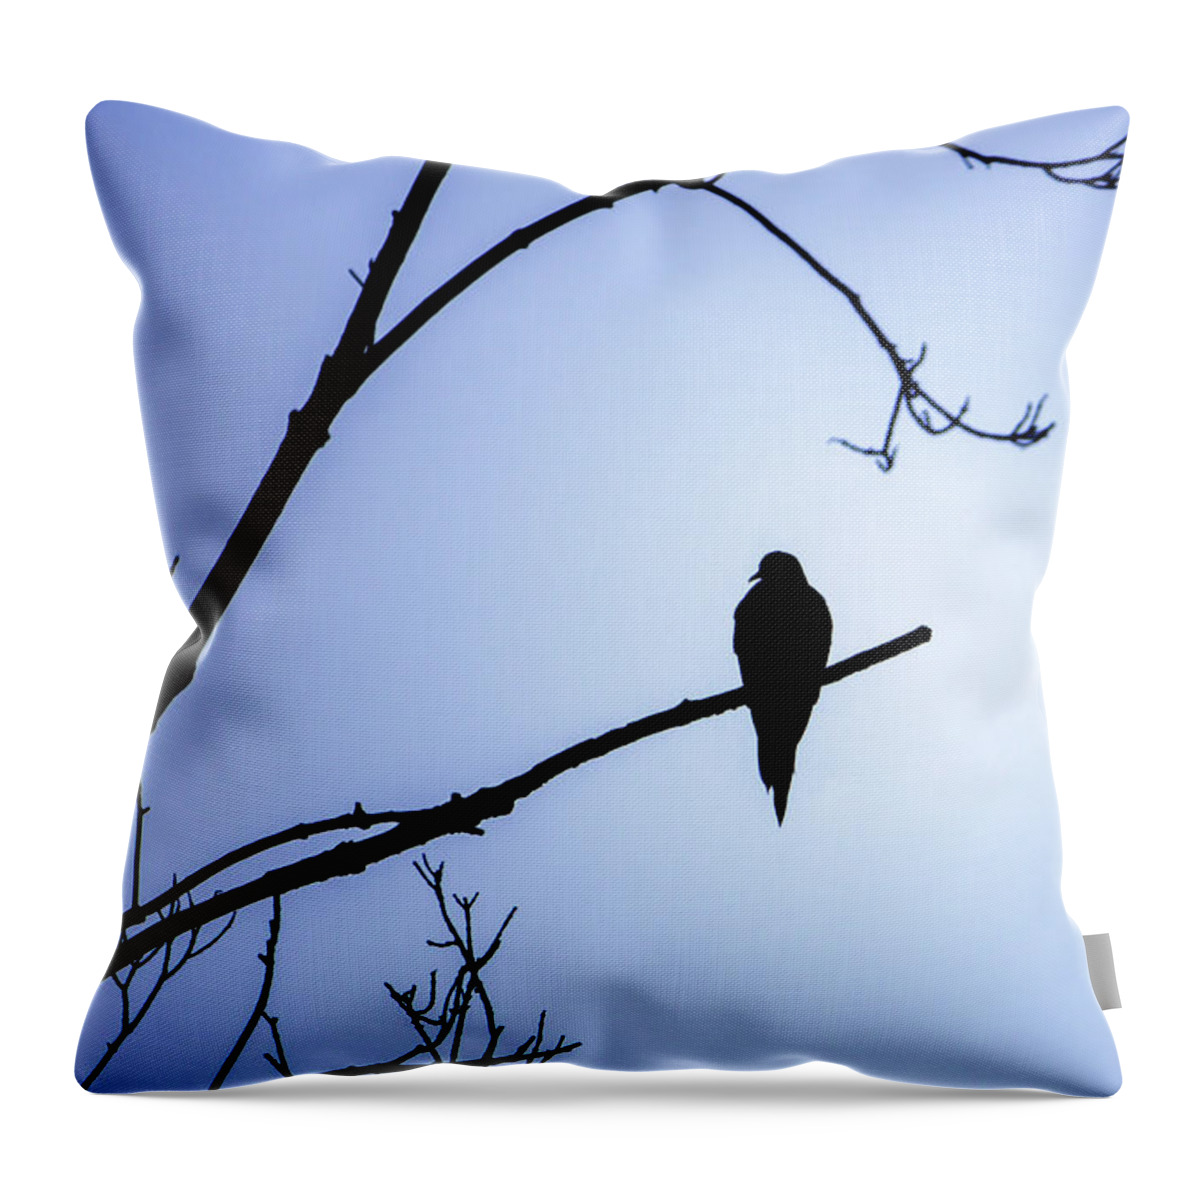 Bird Throw Pillow featuring the photograph Mourning Dove Silhouette - Blue Skies by Jason Fink